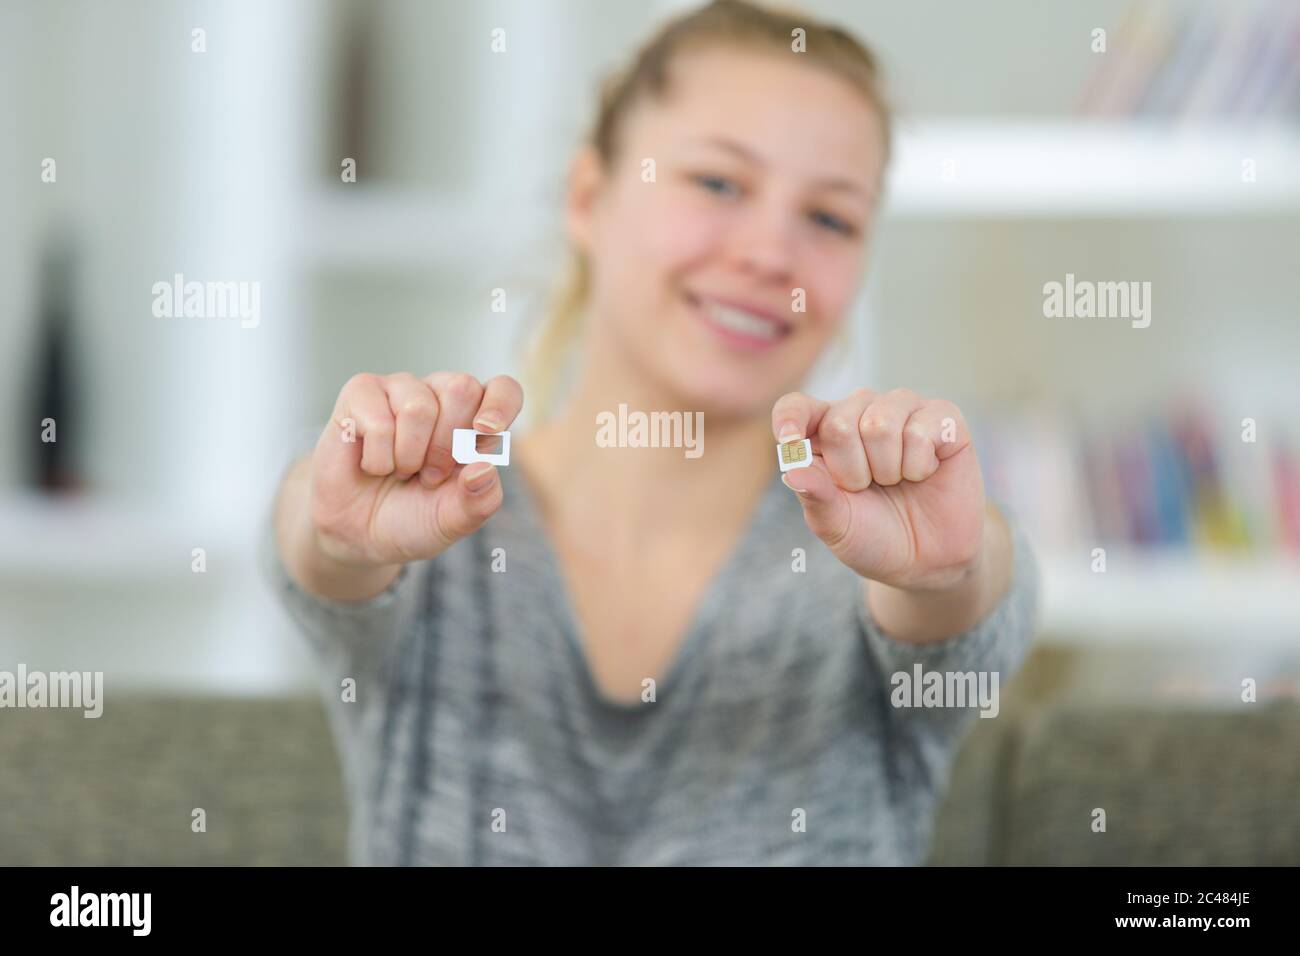 happy woman hand holding a sim card Stock Photo